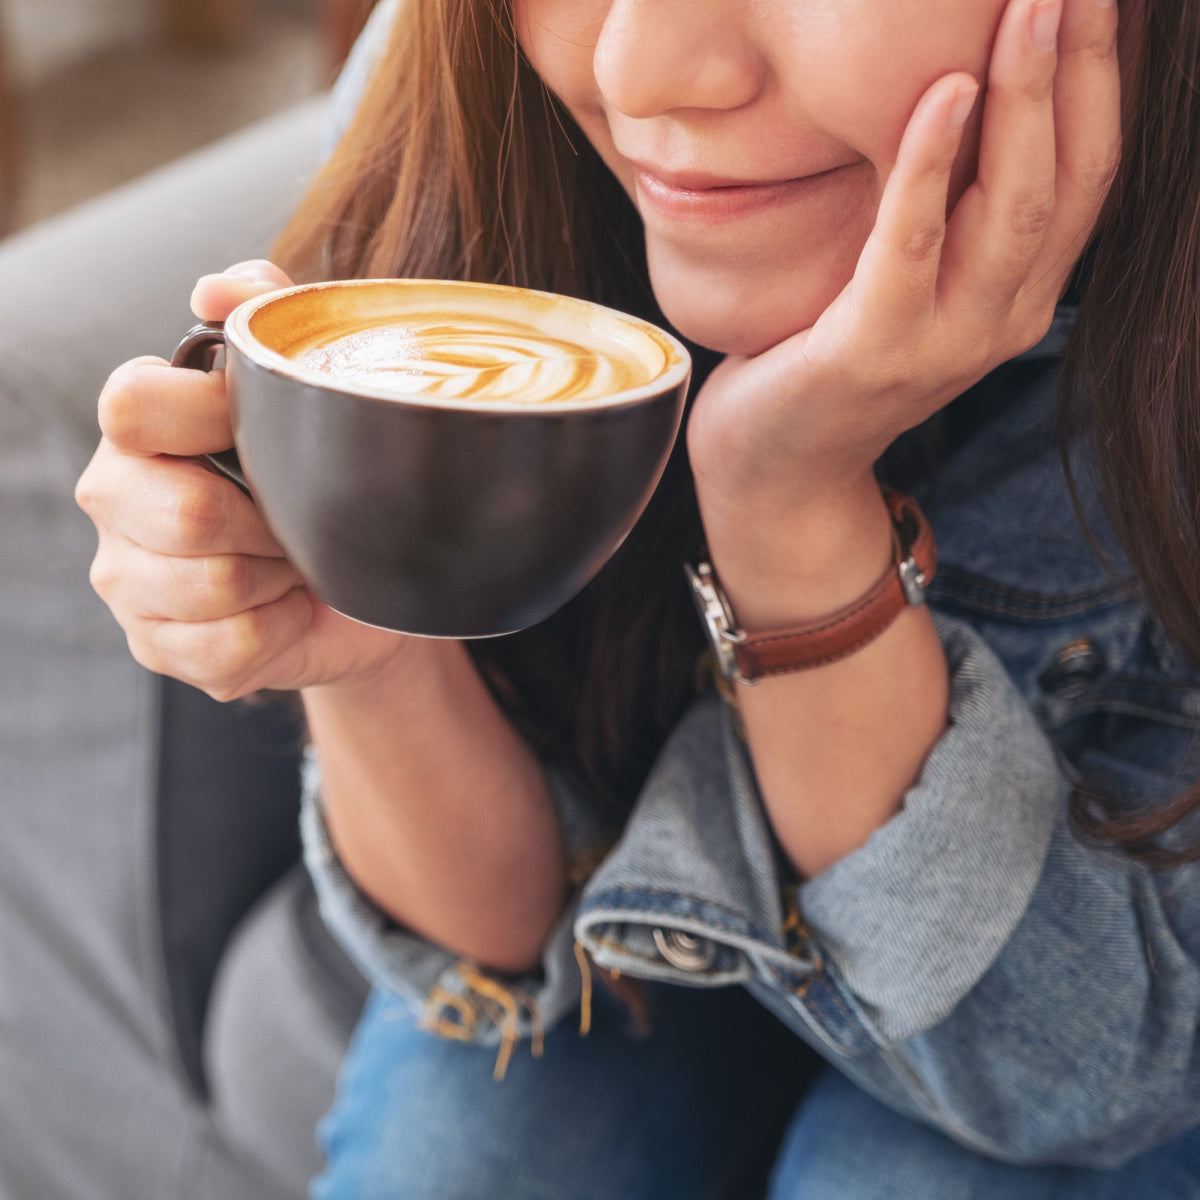 Benefits of Drinking Coffee You Probably Didn't Know About